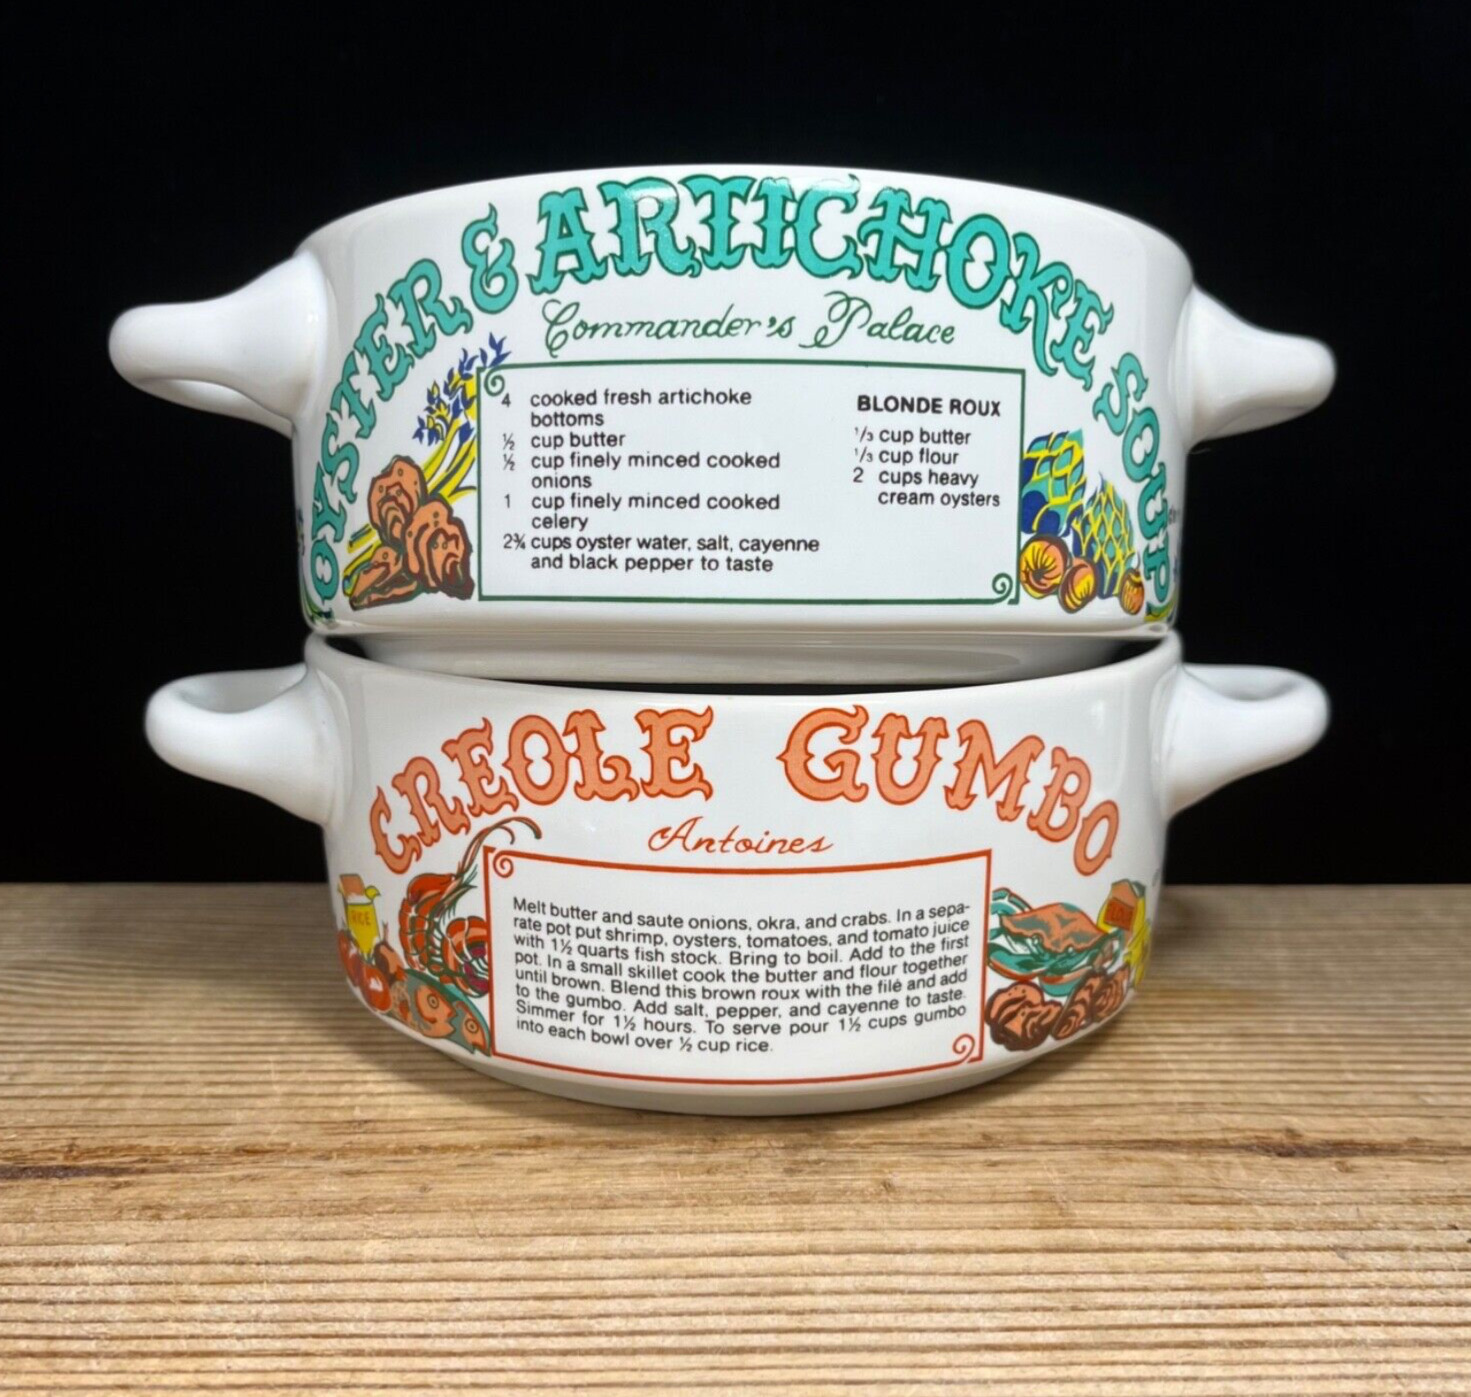 Ljungberg New Orleans Soup Recipe Bowls- Lot 2 Creole Gumbo, Oyster Soup